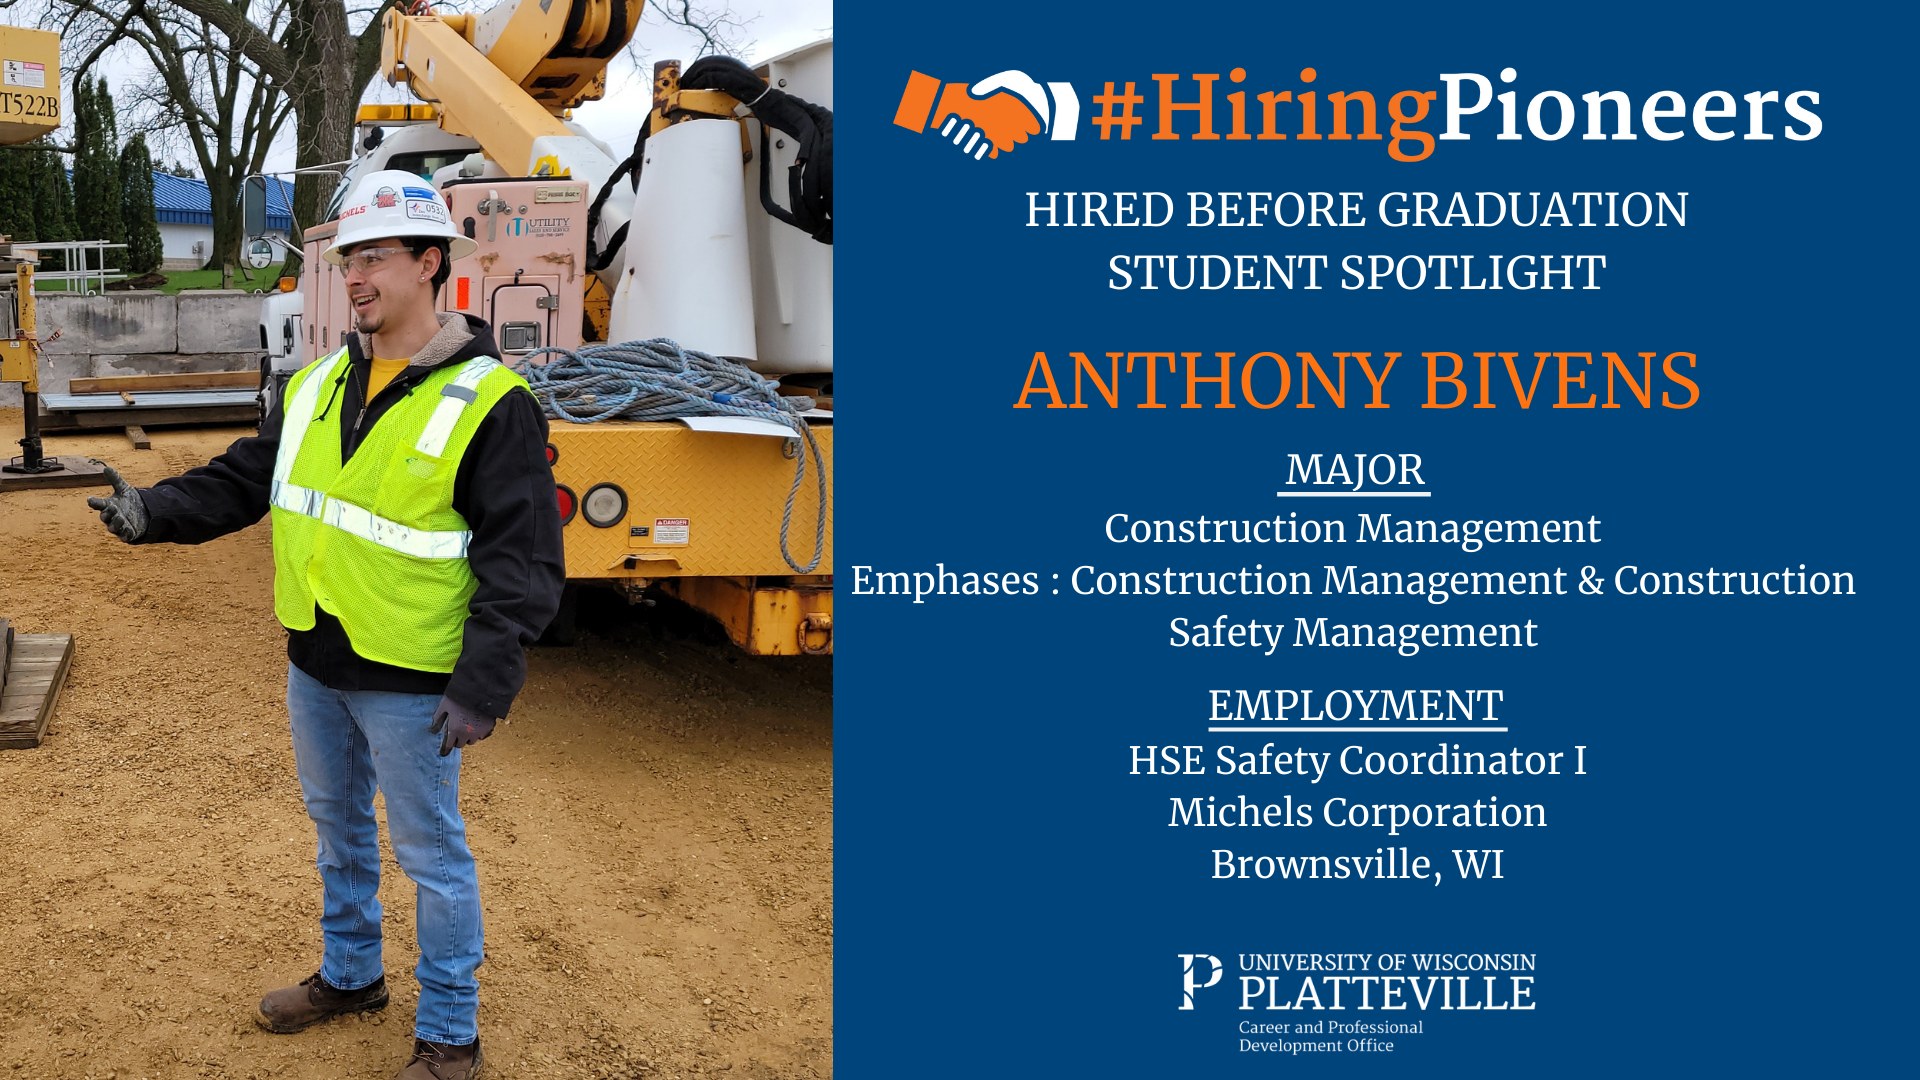 Anthony Biven, Hired Before Graduation